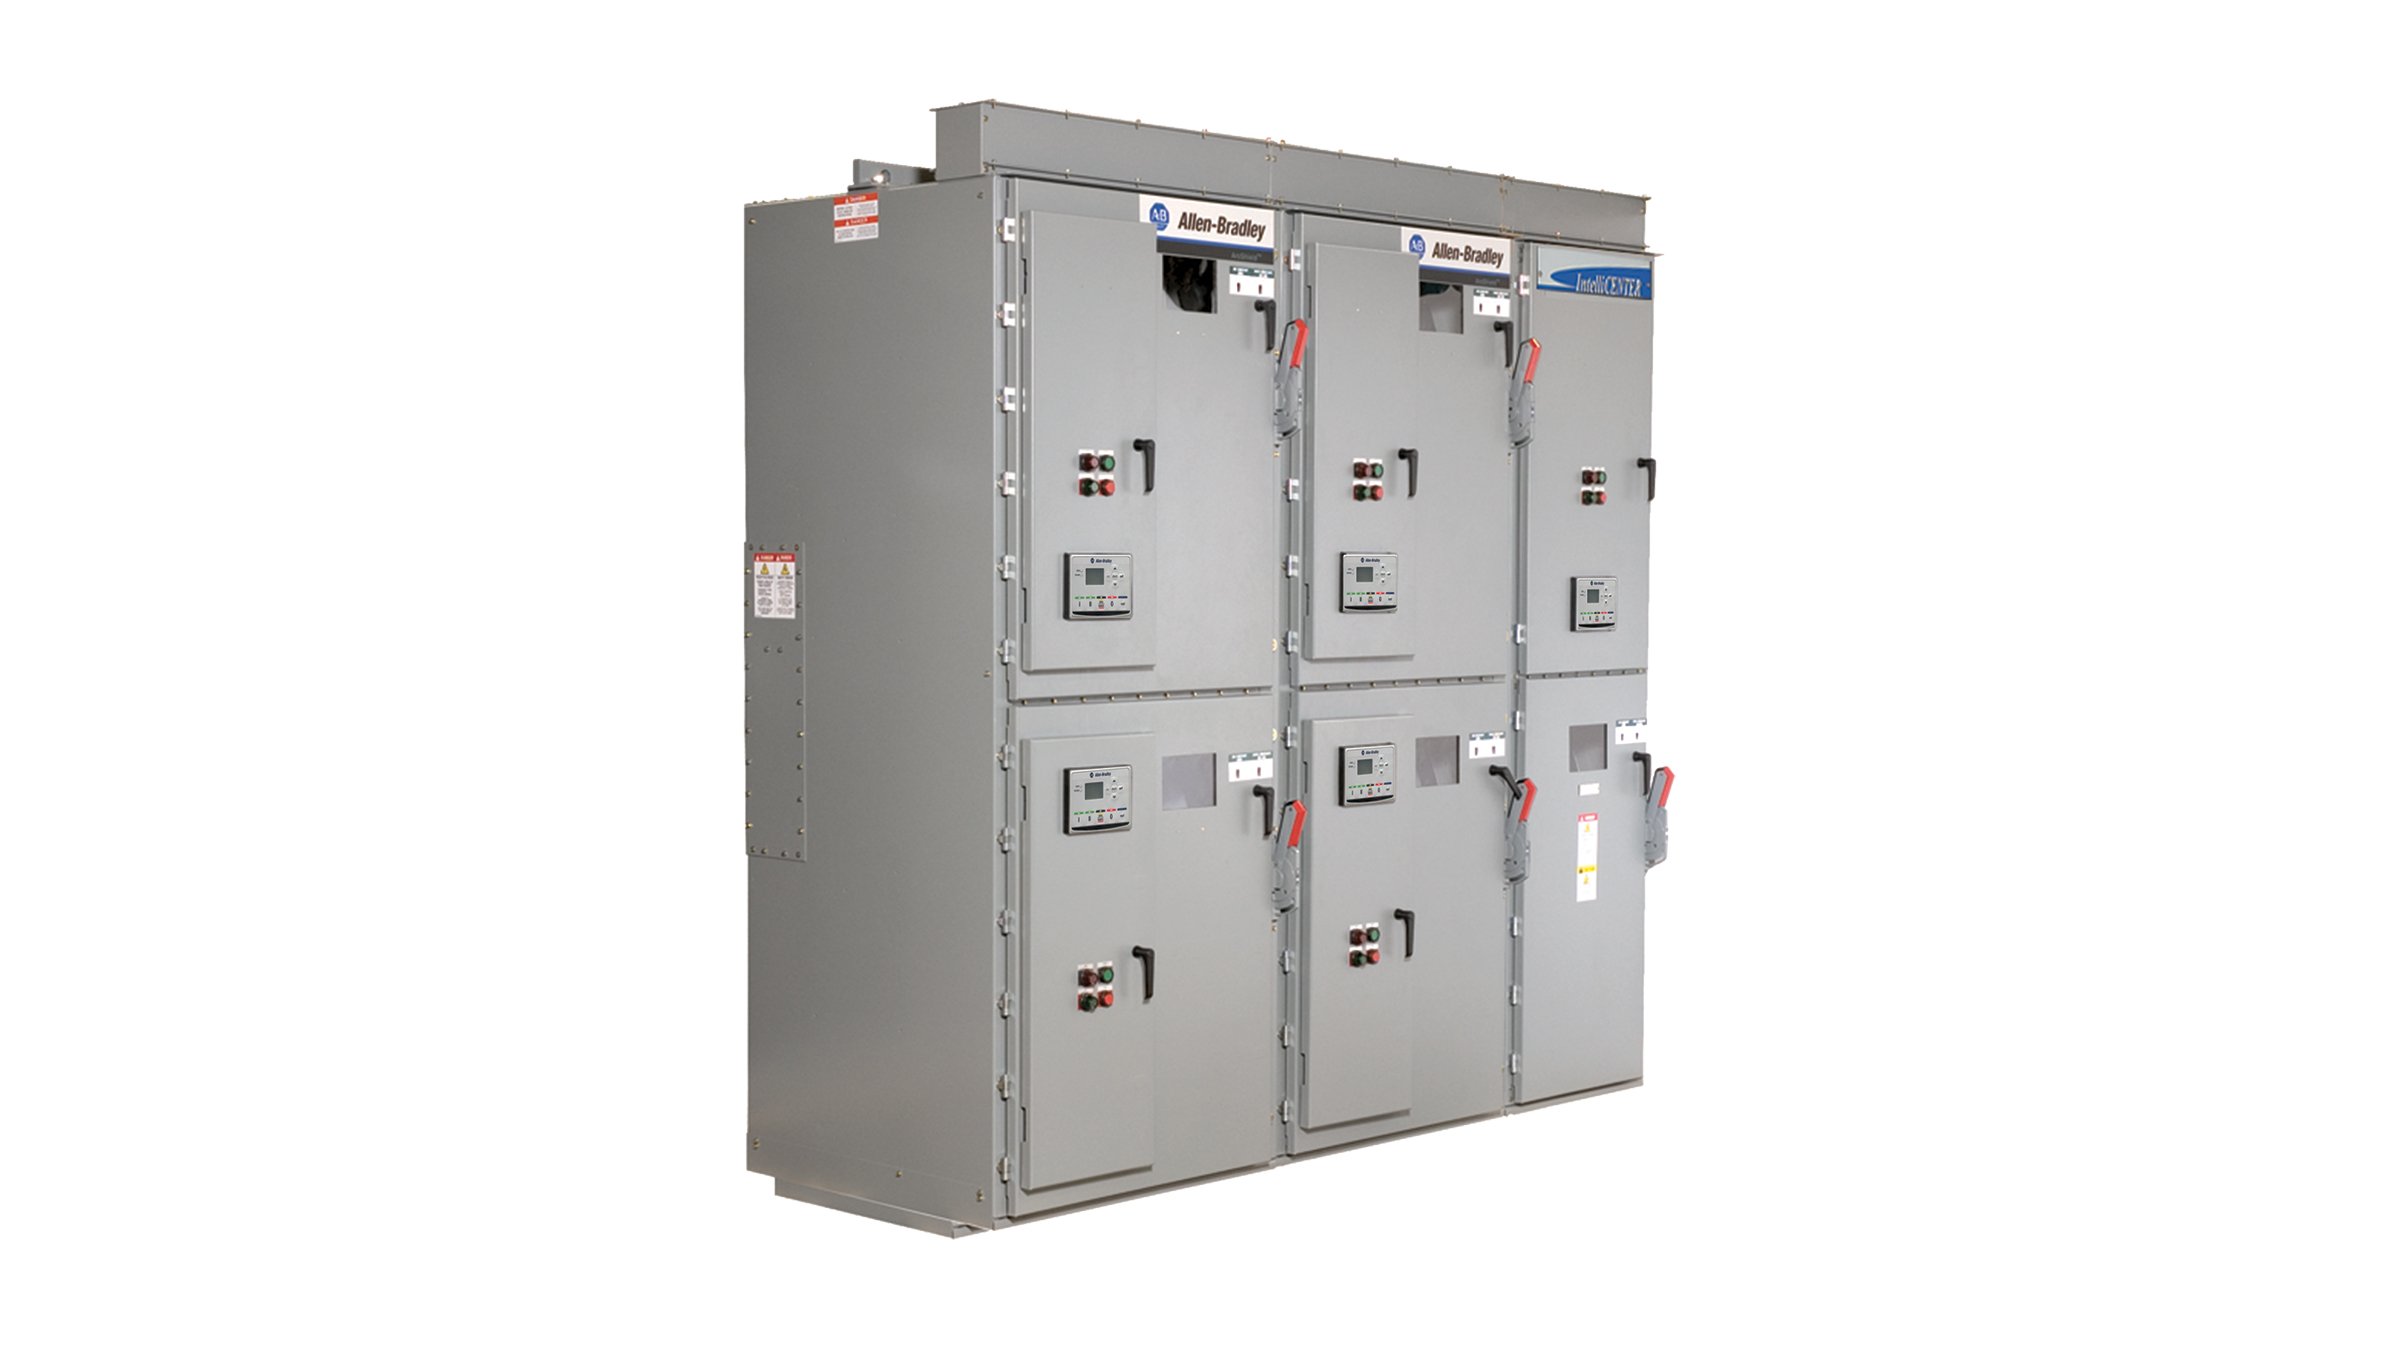 A tall, gray, metal three-section industrial cabinets house a CENTERLINE 1500 motor control center.